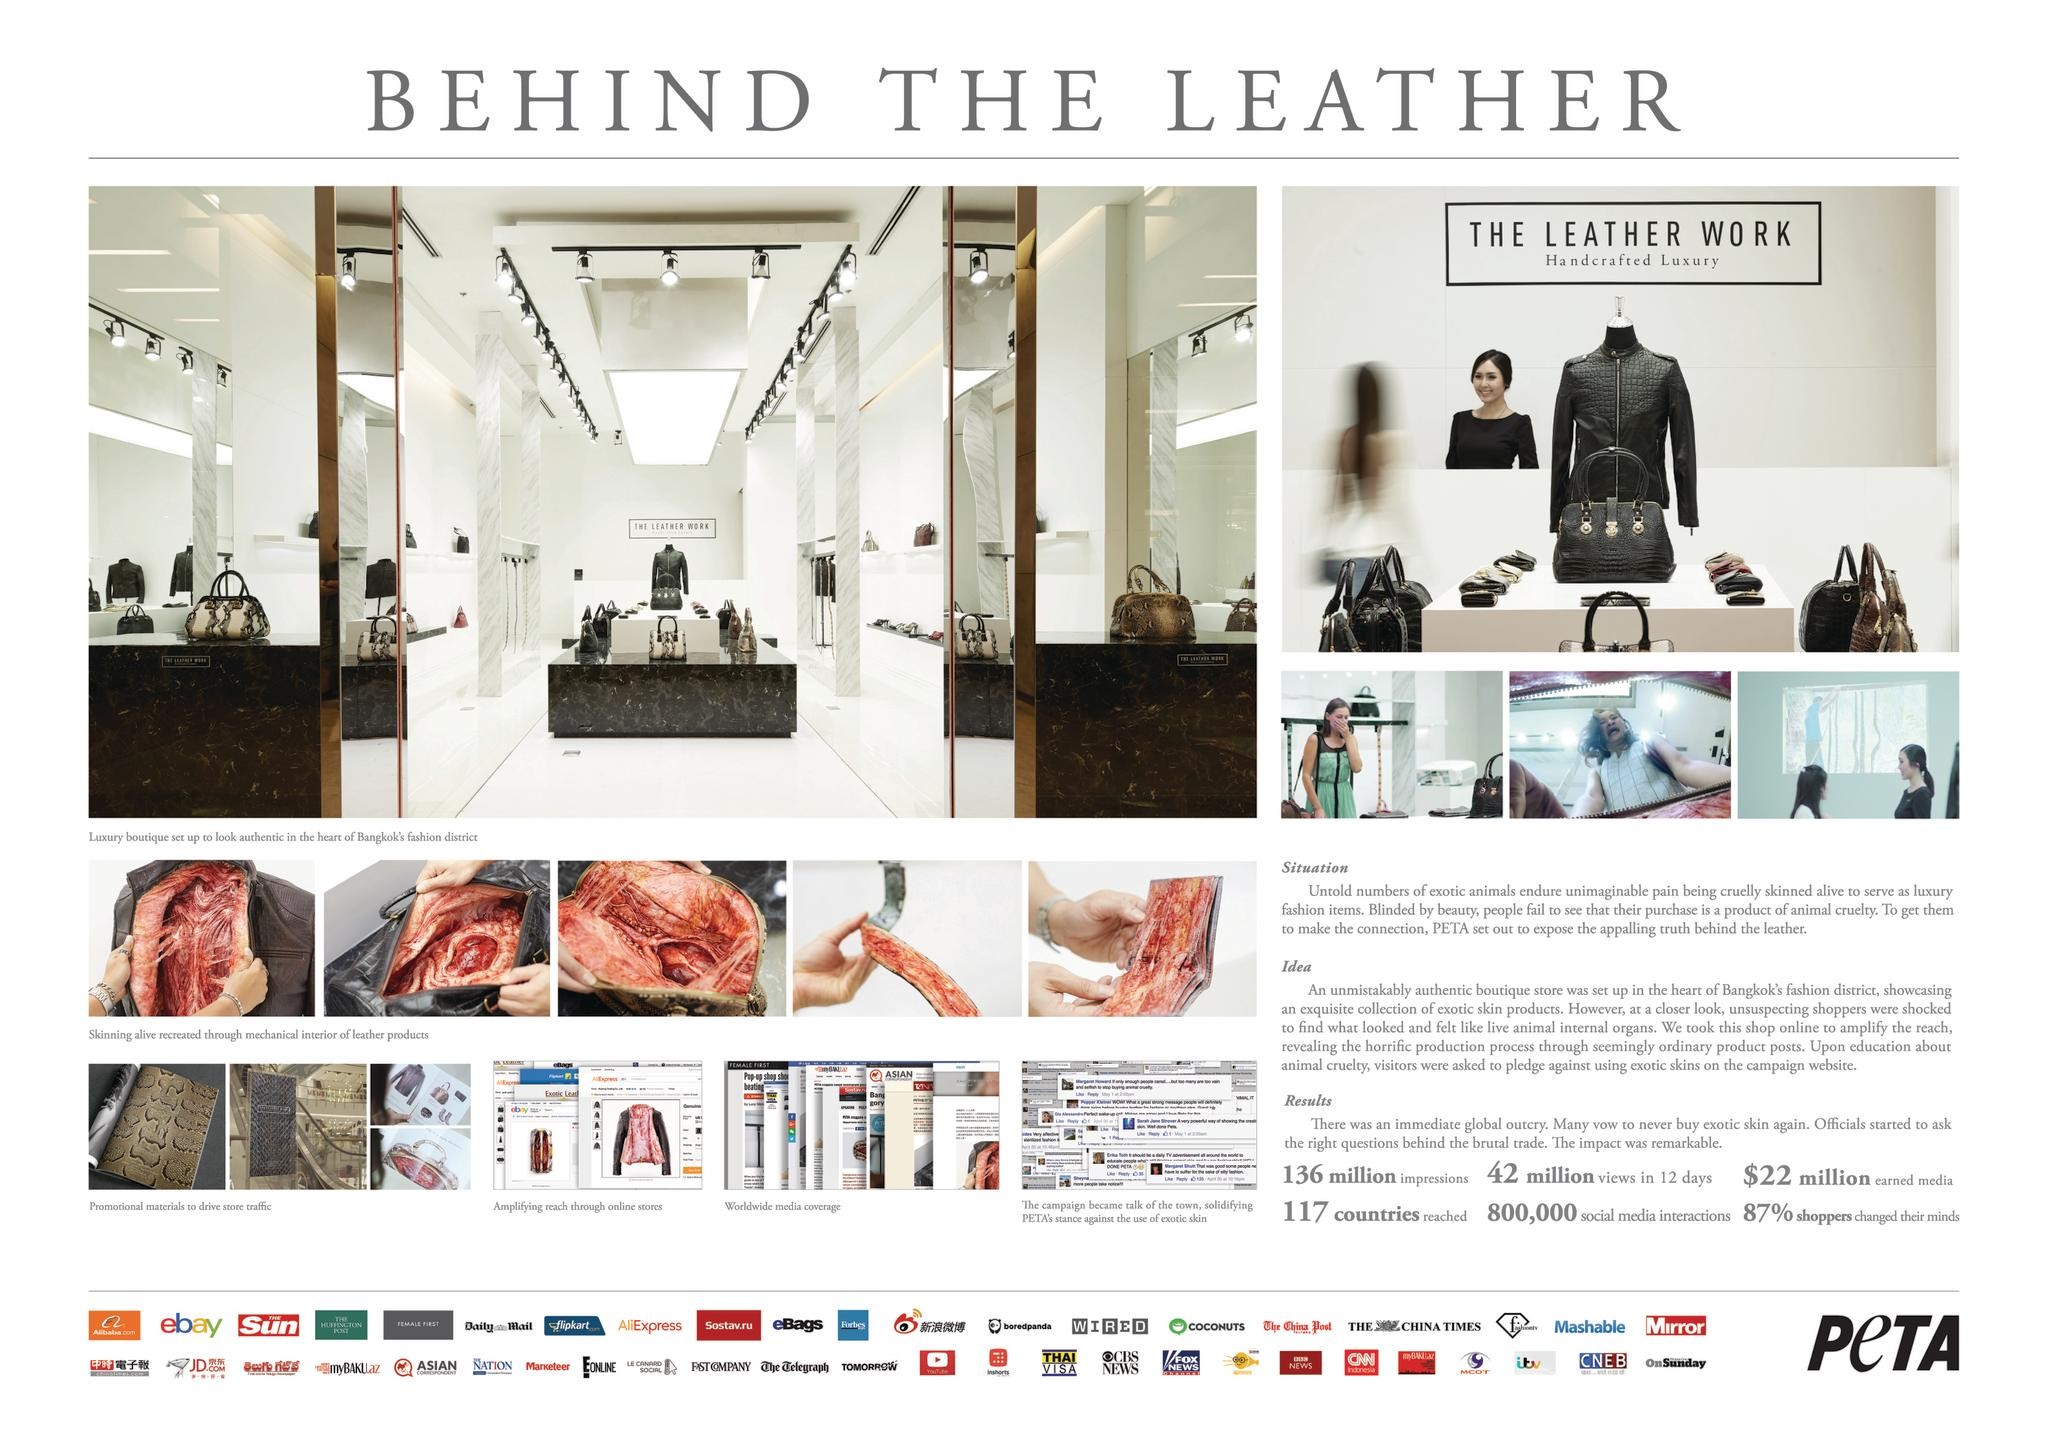 BEHIND THE LEATHER